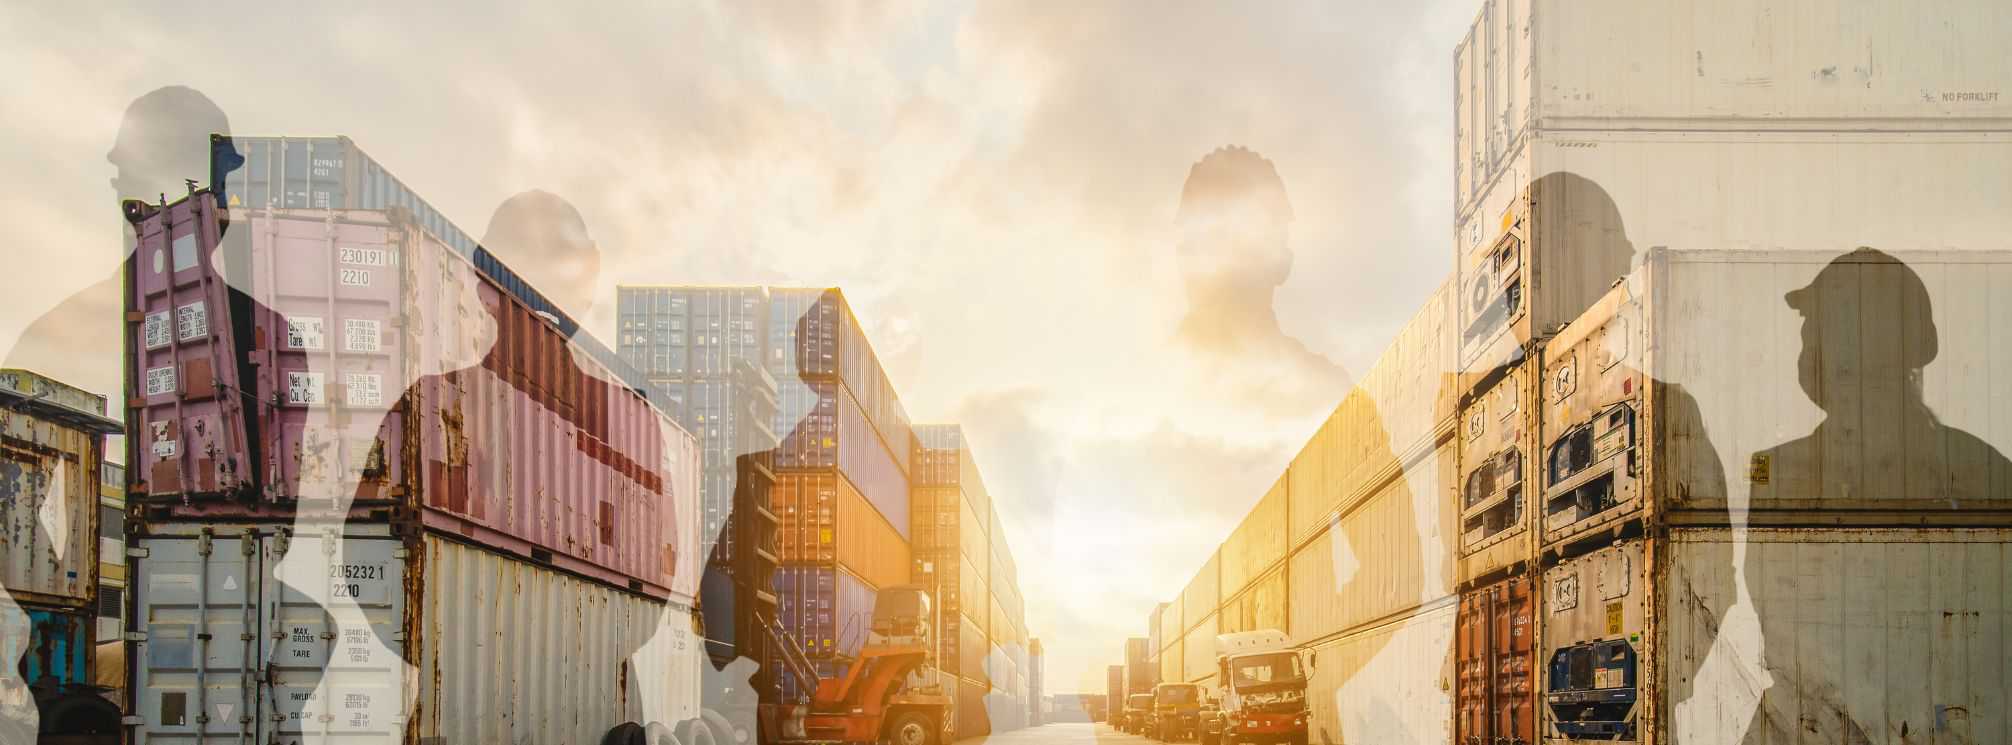 shipping container yard with the shadow outlines of frontline logistics employees overlaid on the image.